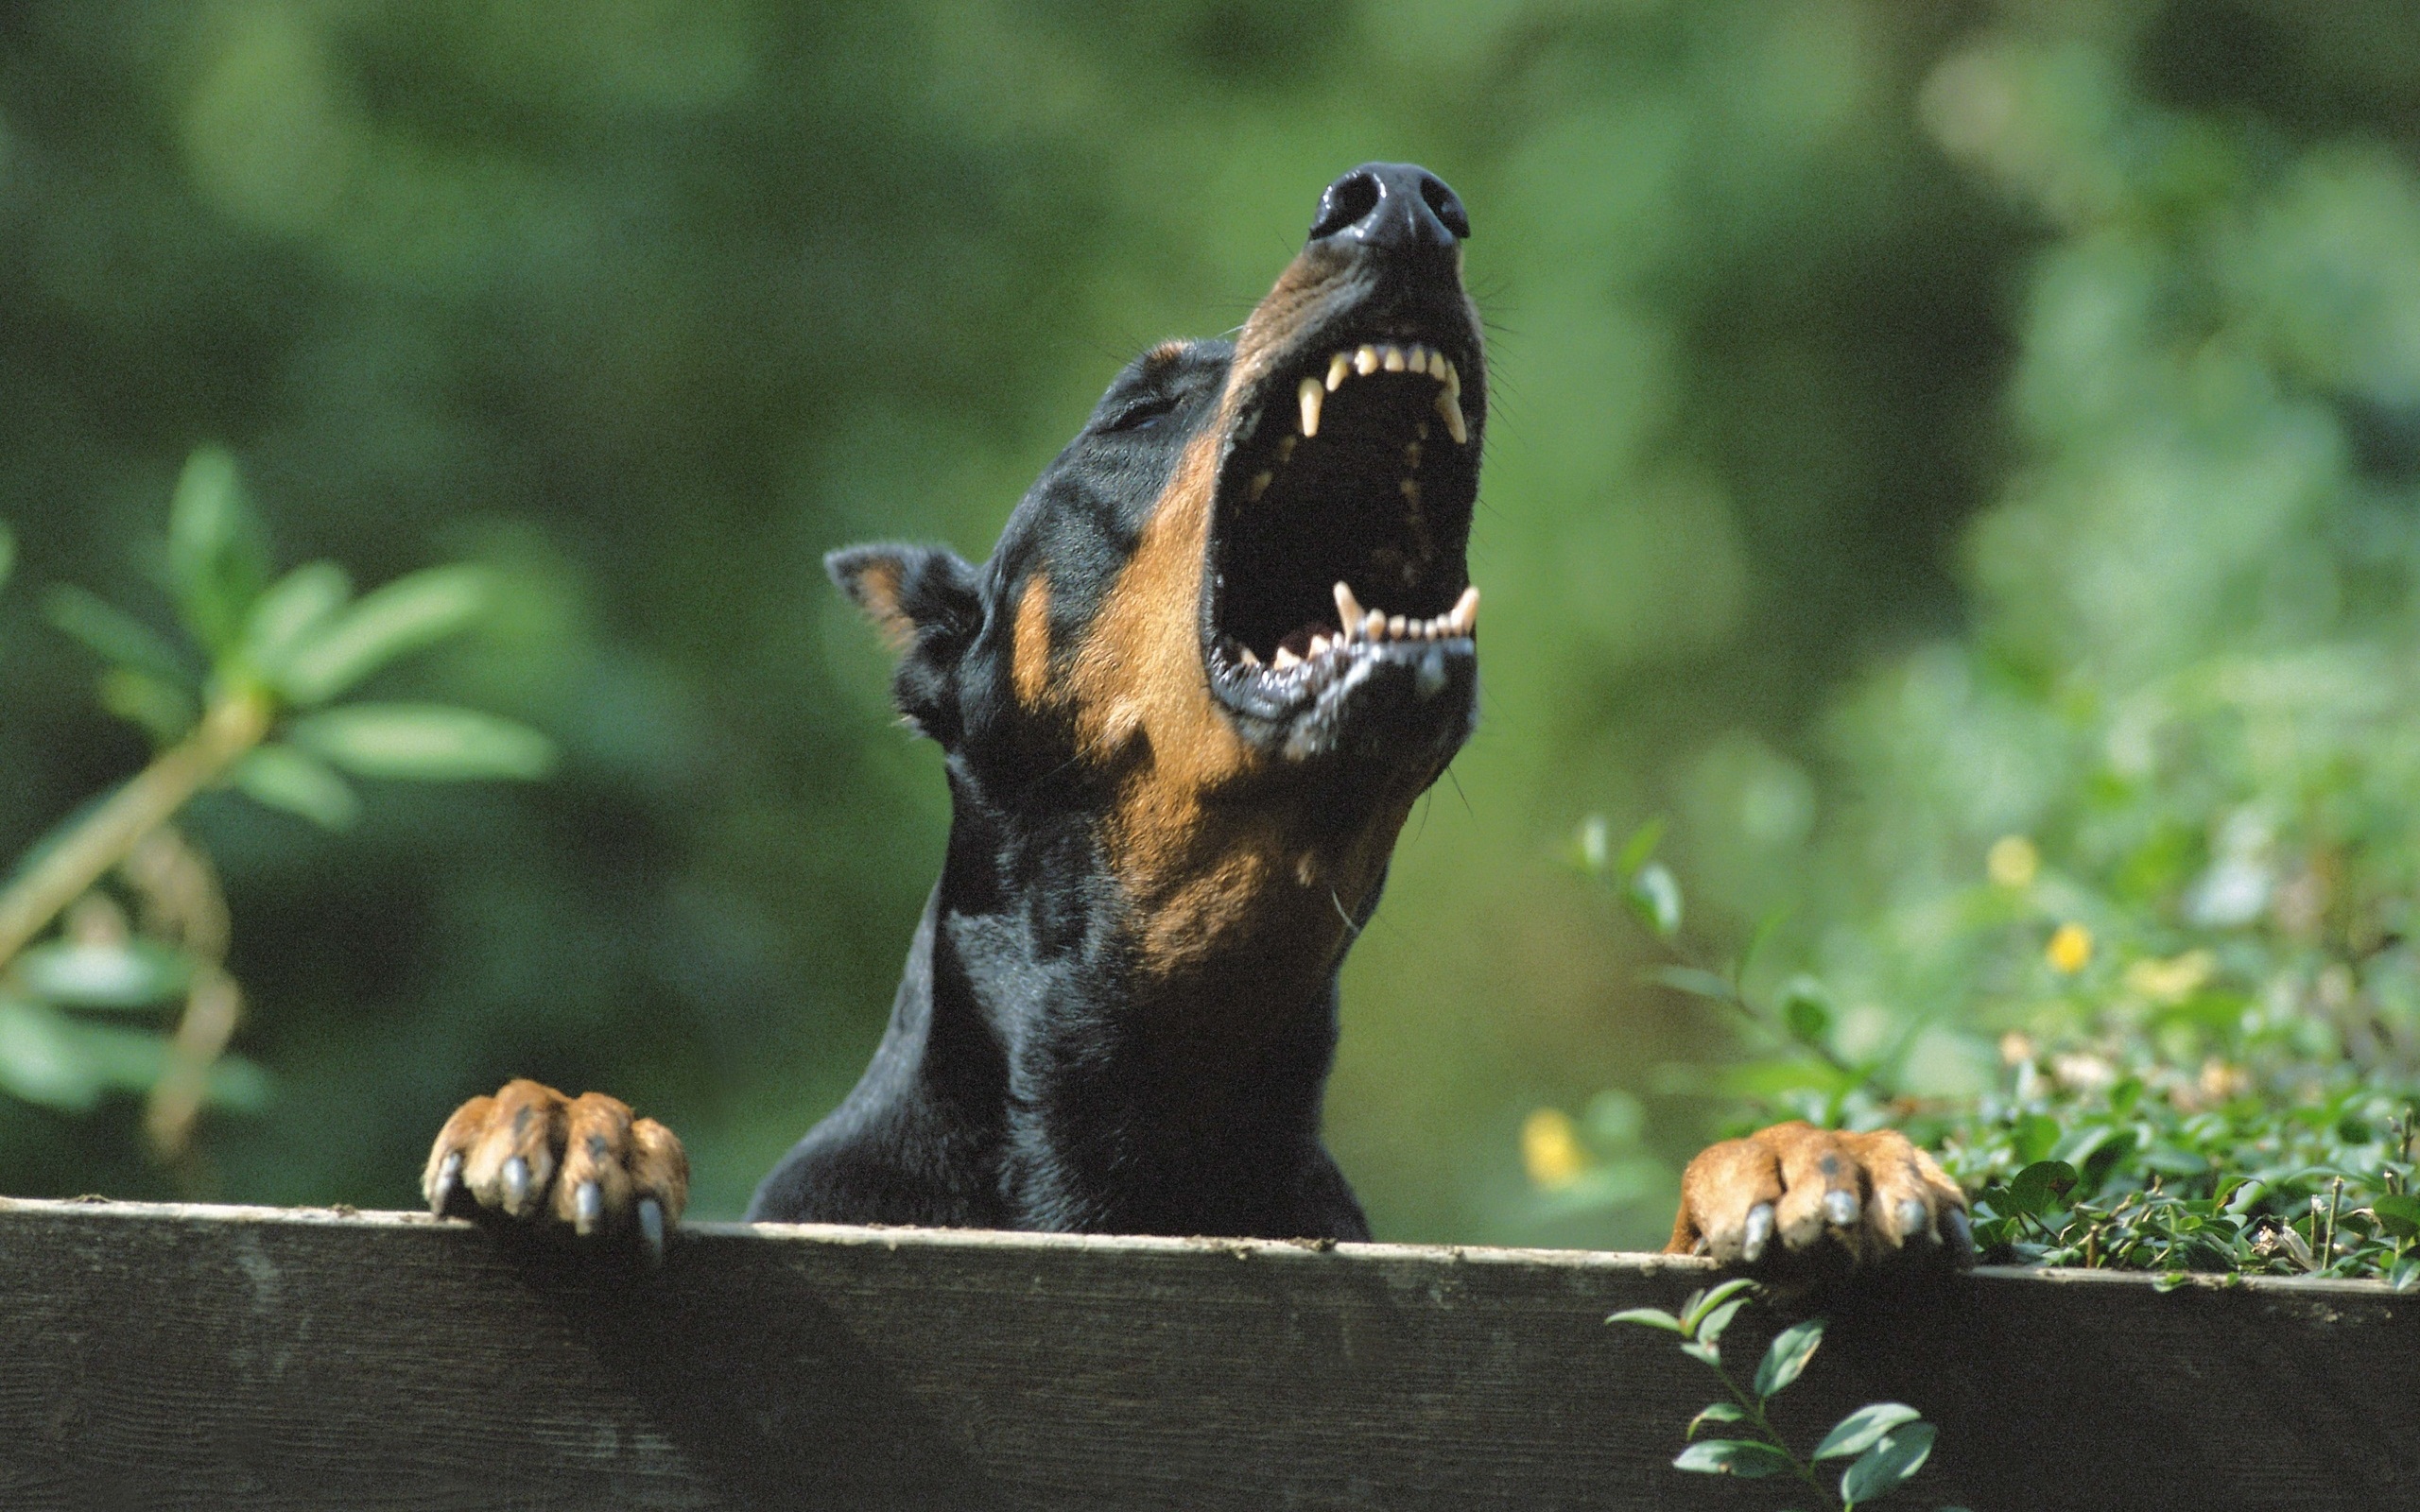 LXP - Lifexpe - Animals Dogs Angry Doberman barking Your Dog Barking Out Of Control? Here’s What To Do